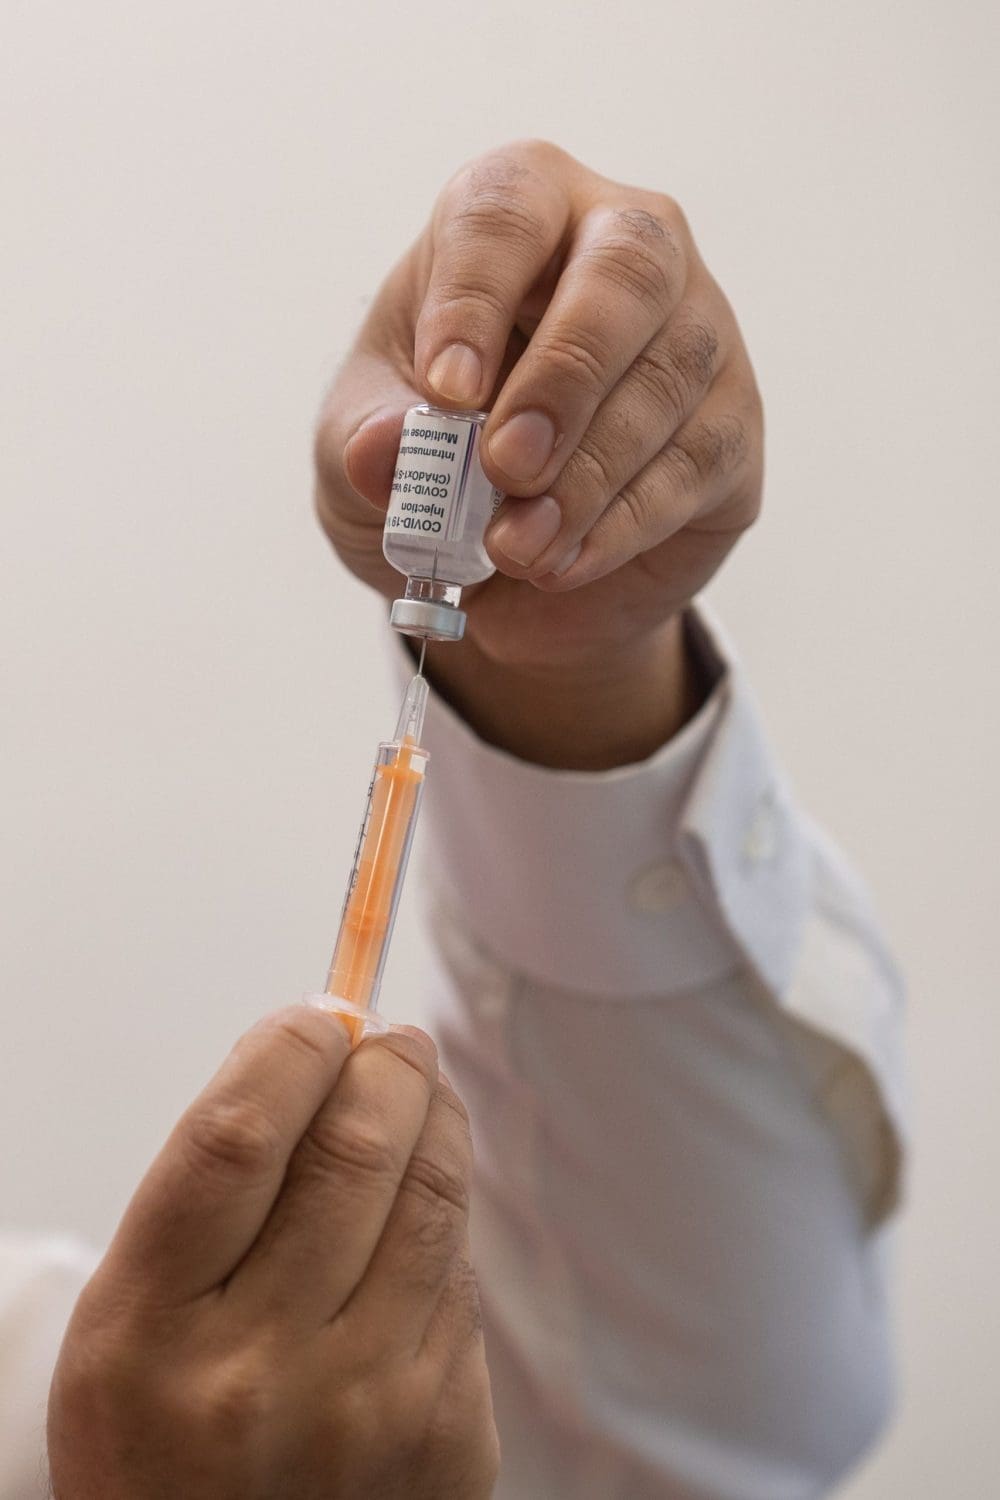 A syringe and a bottle of vaccine